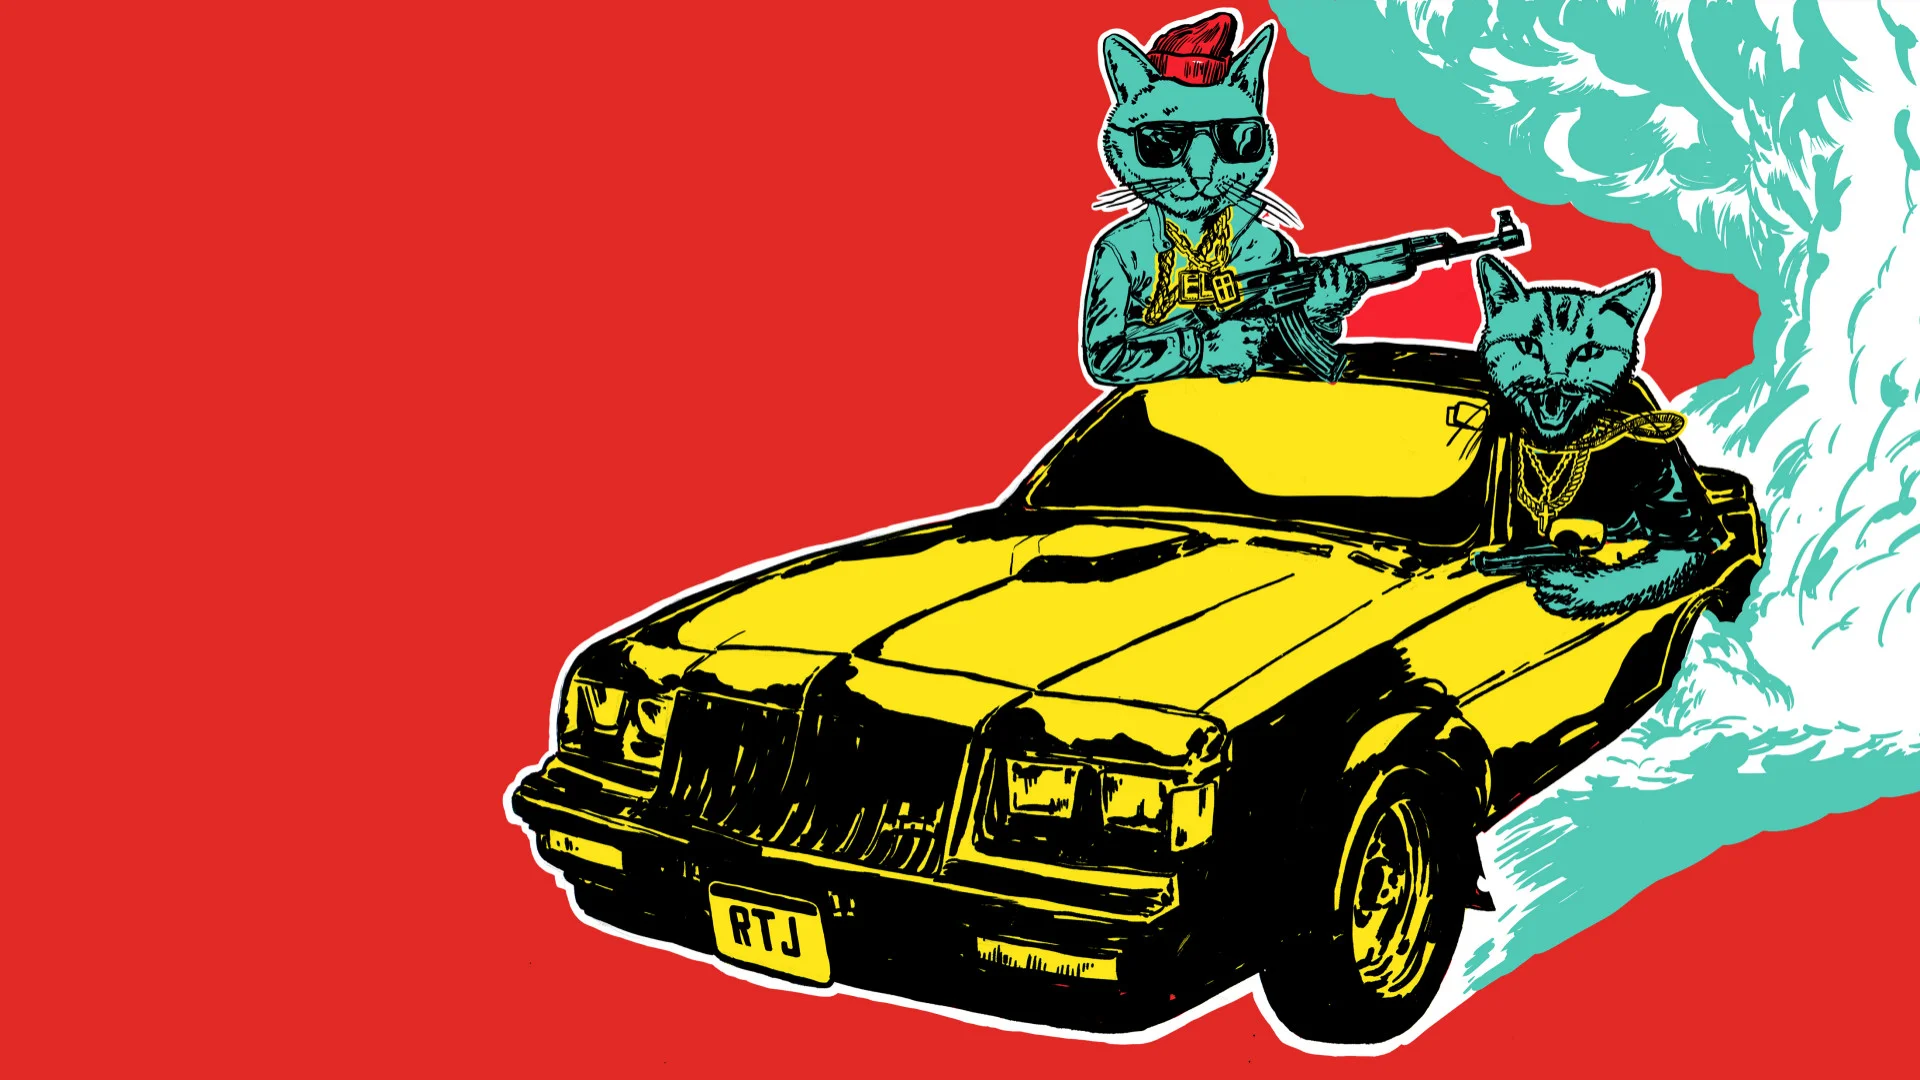 1920x1080RTJ Meow The Jewels